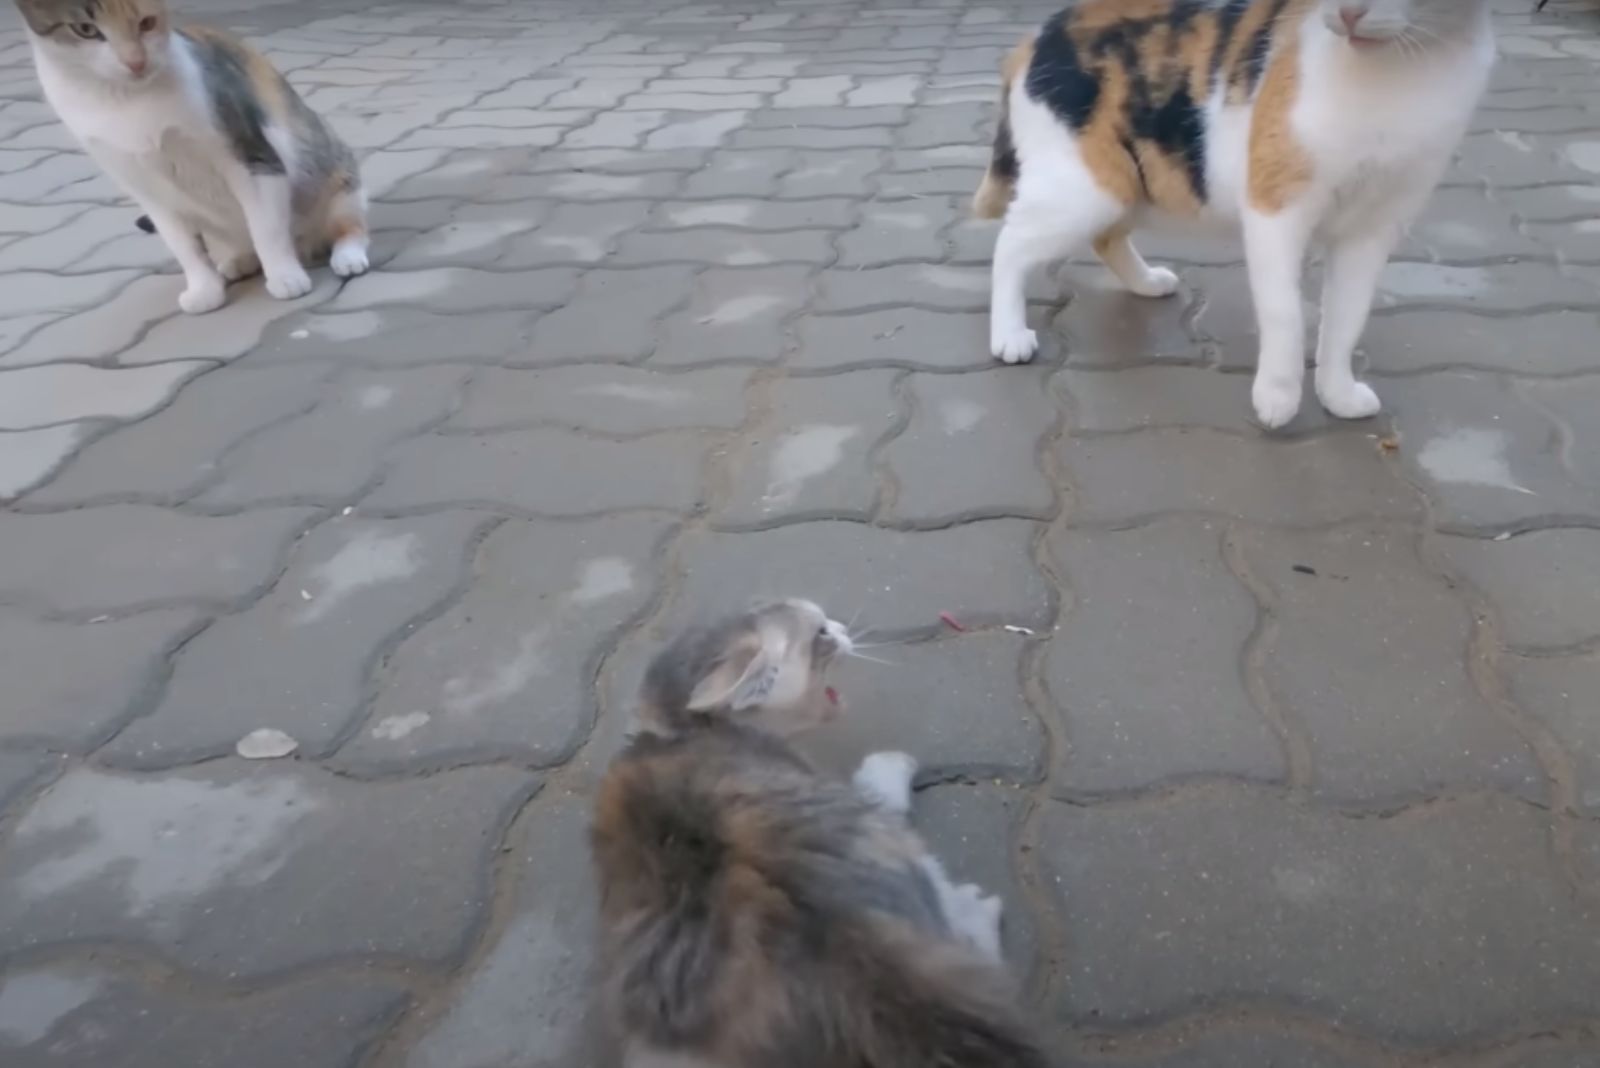 kitten hissing at two cats